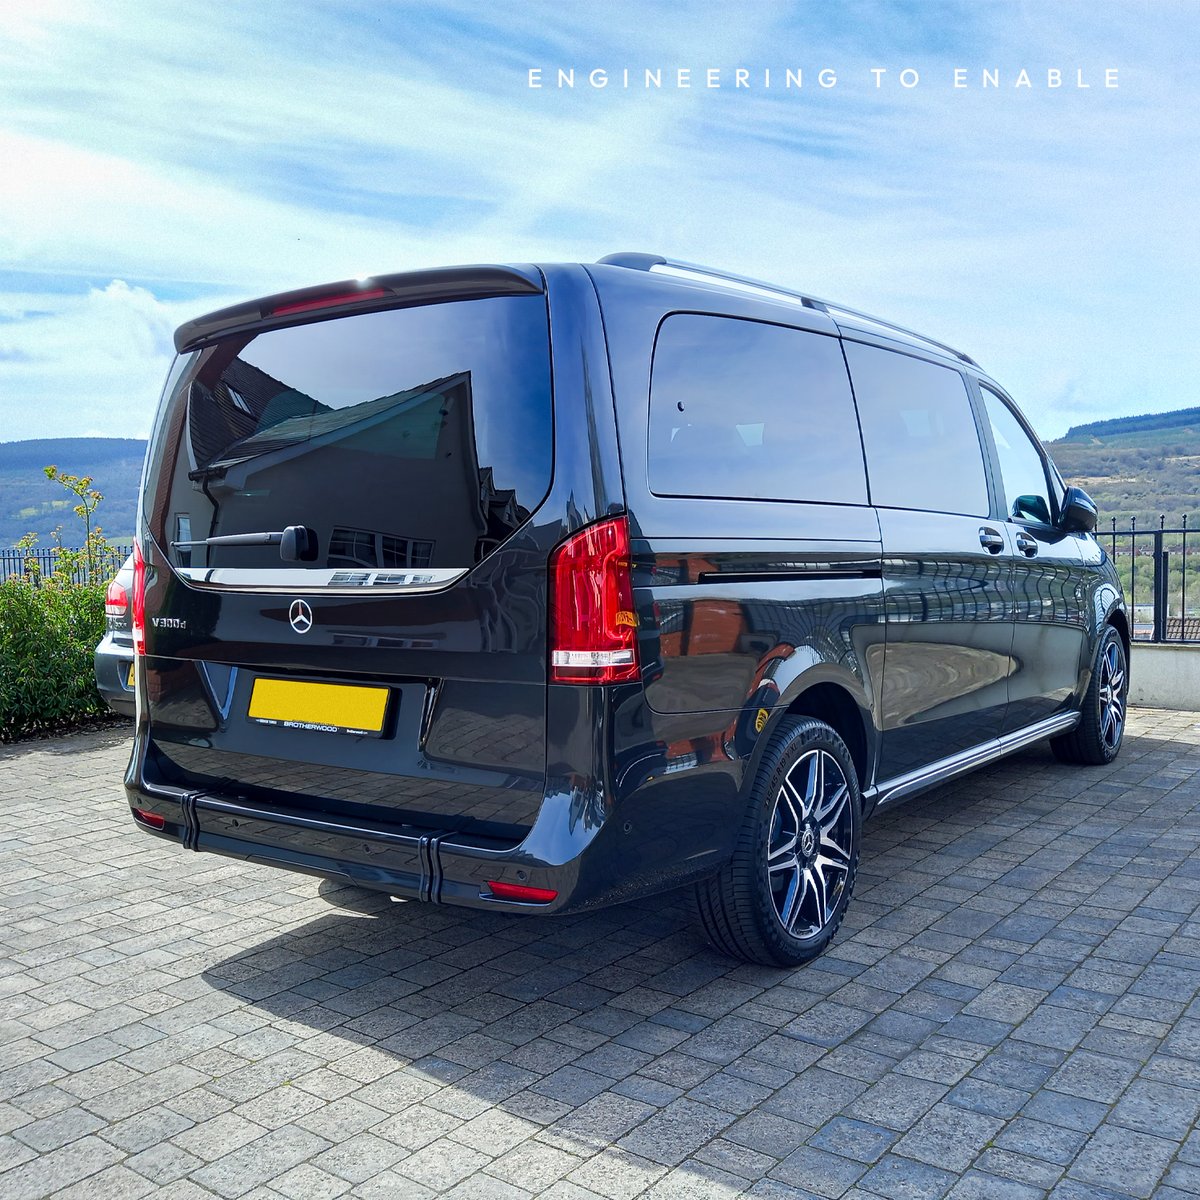 This stylish & luxurious Mercedes-Benz V-Class with our 'Klastar' Wheelchair Accessible Vehicle conversion was delivered to a client in Wales this week! To learn more about this incredible vehicle or book a FREE no-obligation home demonstration, call today on 0330 174 1883.